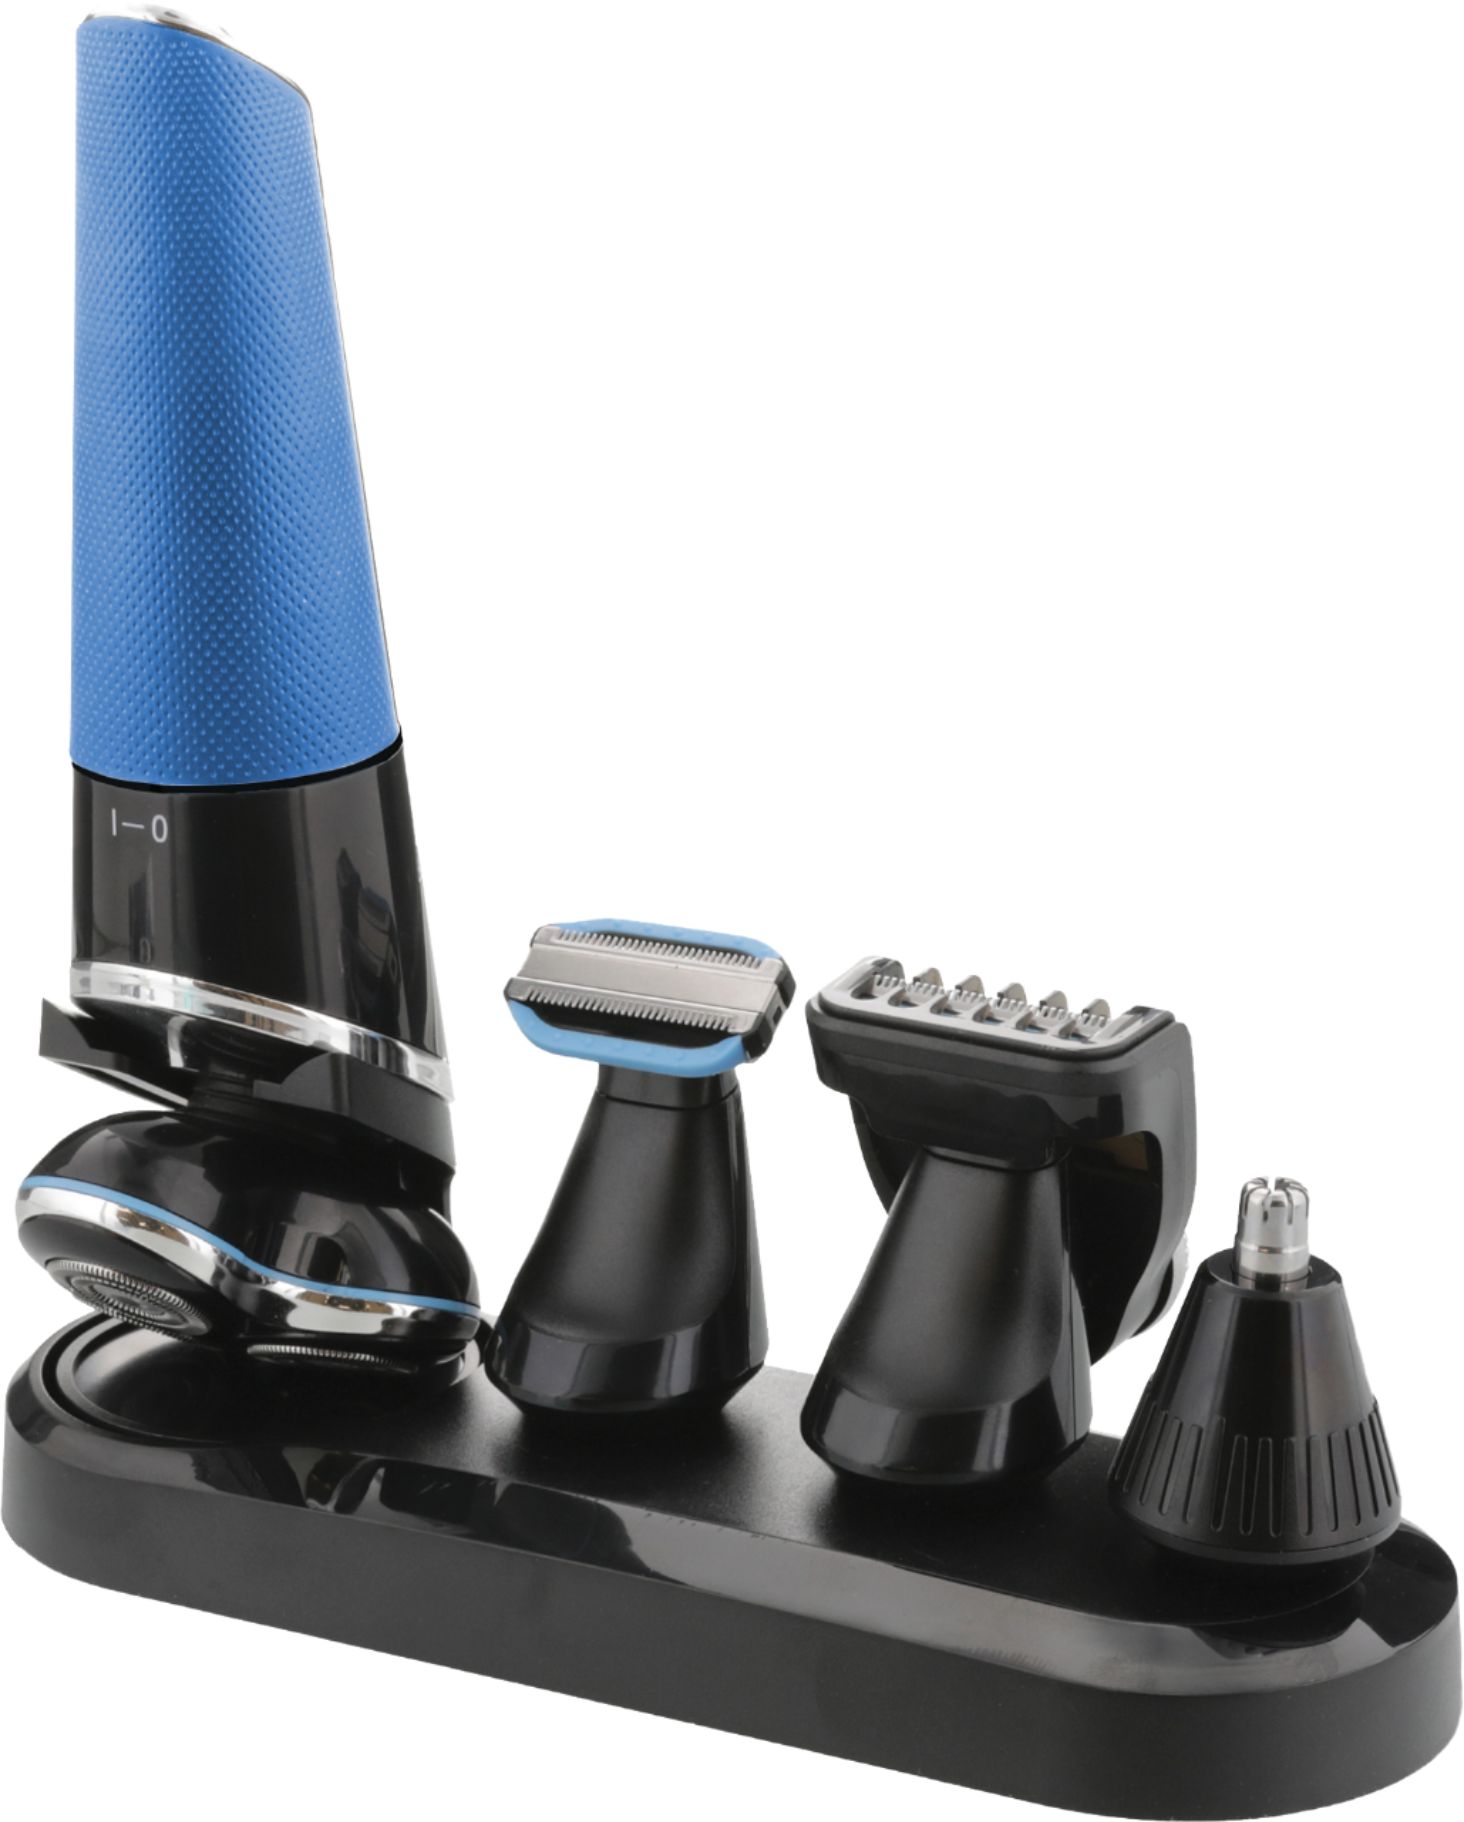 Angle View: Barbasol - 5 in 1 Rechargeable Wet/Dry Kit w/ Rotary Shaver, Ear/Nose Trimmer, Body Groomer, Beard Trimmer & Beard Trimmer Comb - Blue